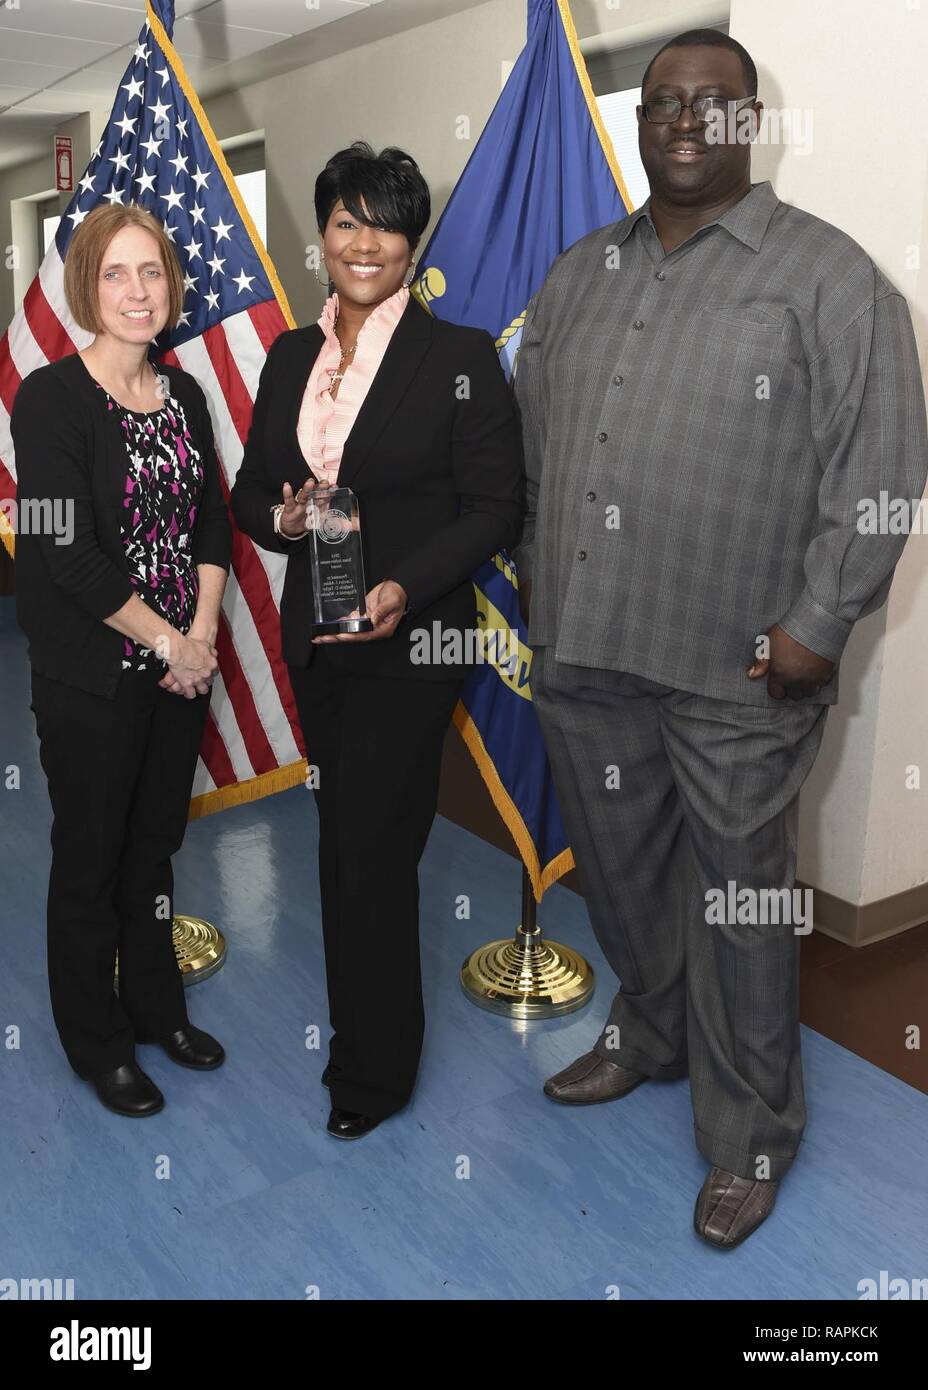 PORTSMOUTH, Va. (Feb. 28, 2017) Navy Medicine East (NME) budget team with the Annual American Society of Military Comptrollers Team Achievement Award they received Feb. 23 (from left to right):  Carolyn Atkins, financial management analyst; Rashelle D. Taylor, budget department head; and Fitzgerald Wheeler, financial management analyst. NME is one of two regional commands that manage Navy Medicine's global health care network by overseeing the delivery of medical, dental and other health care services to approximately one million patients across almost 100 facilities across the eastern hemisph Stock Photo